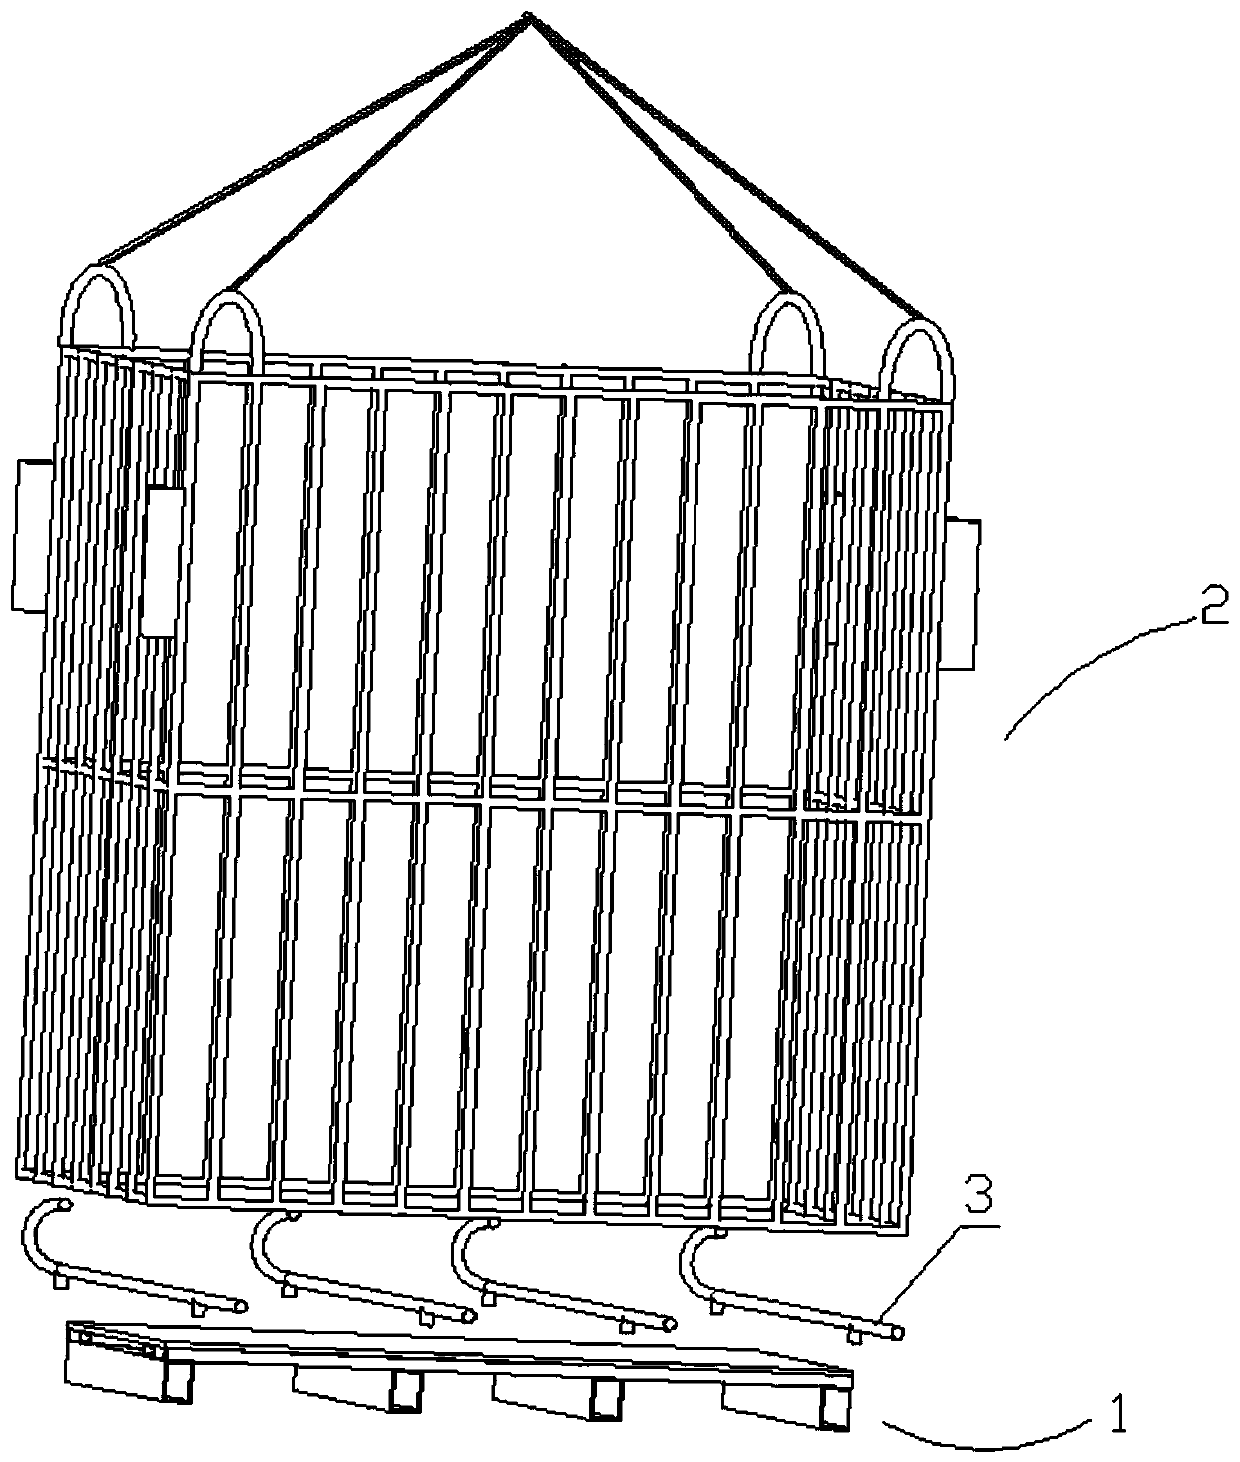 Whole stack hoisting device and method for aerated bricks